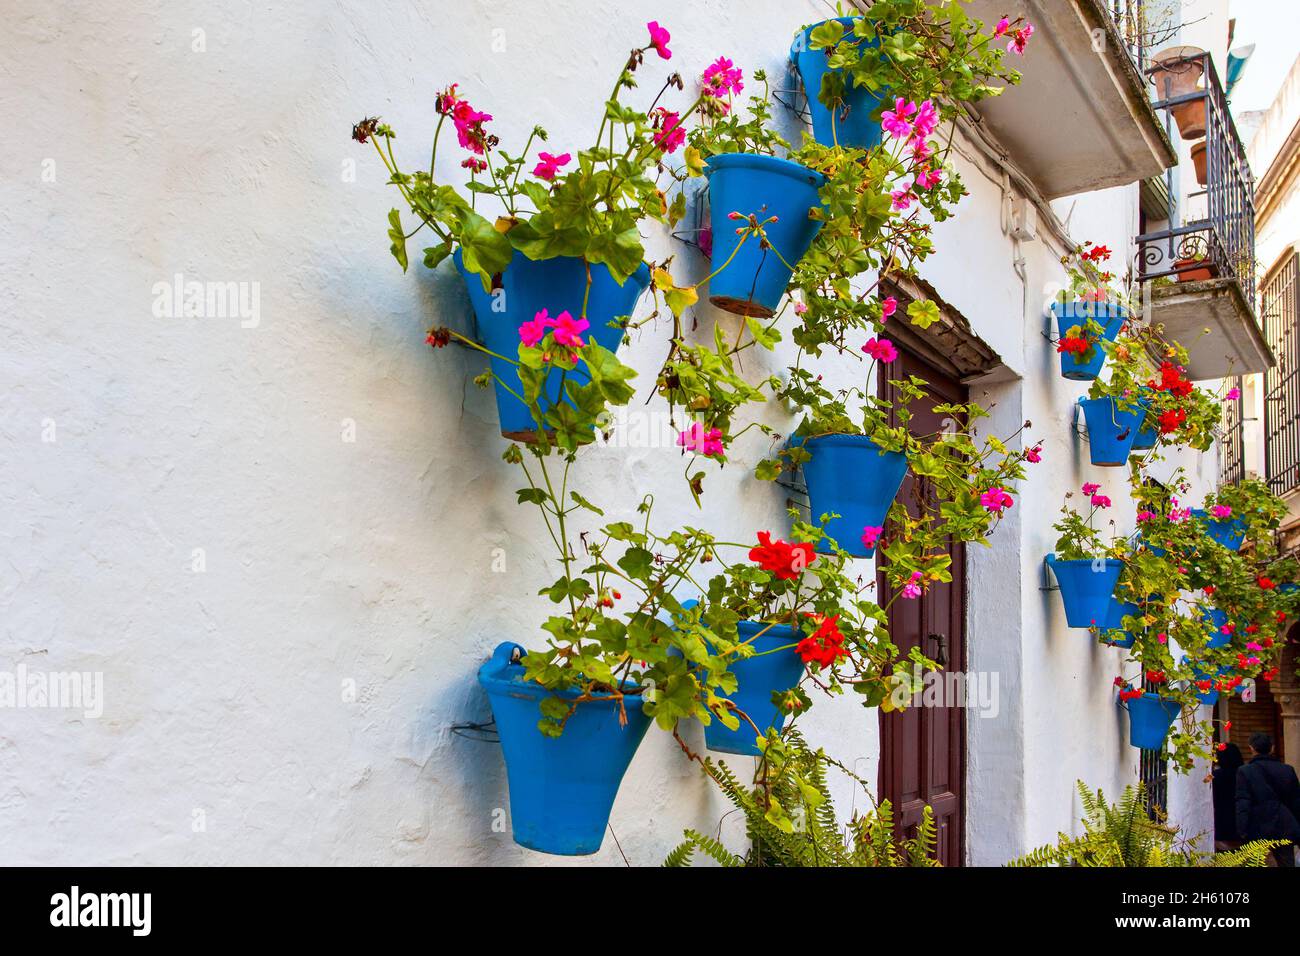 Street in the Old town of Cordoba decorated with flower pots, Spain Stock Photo